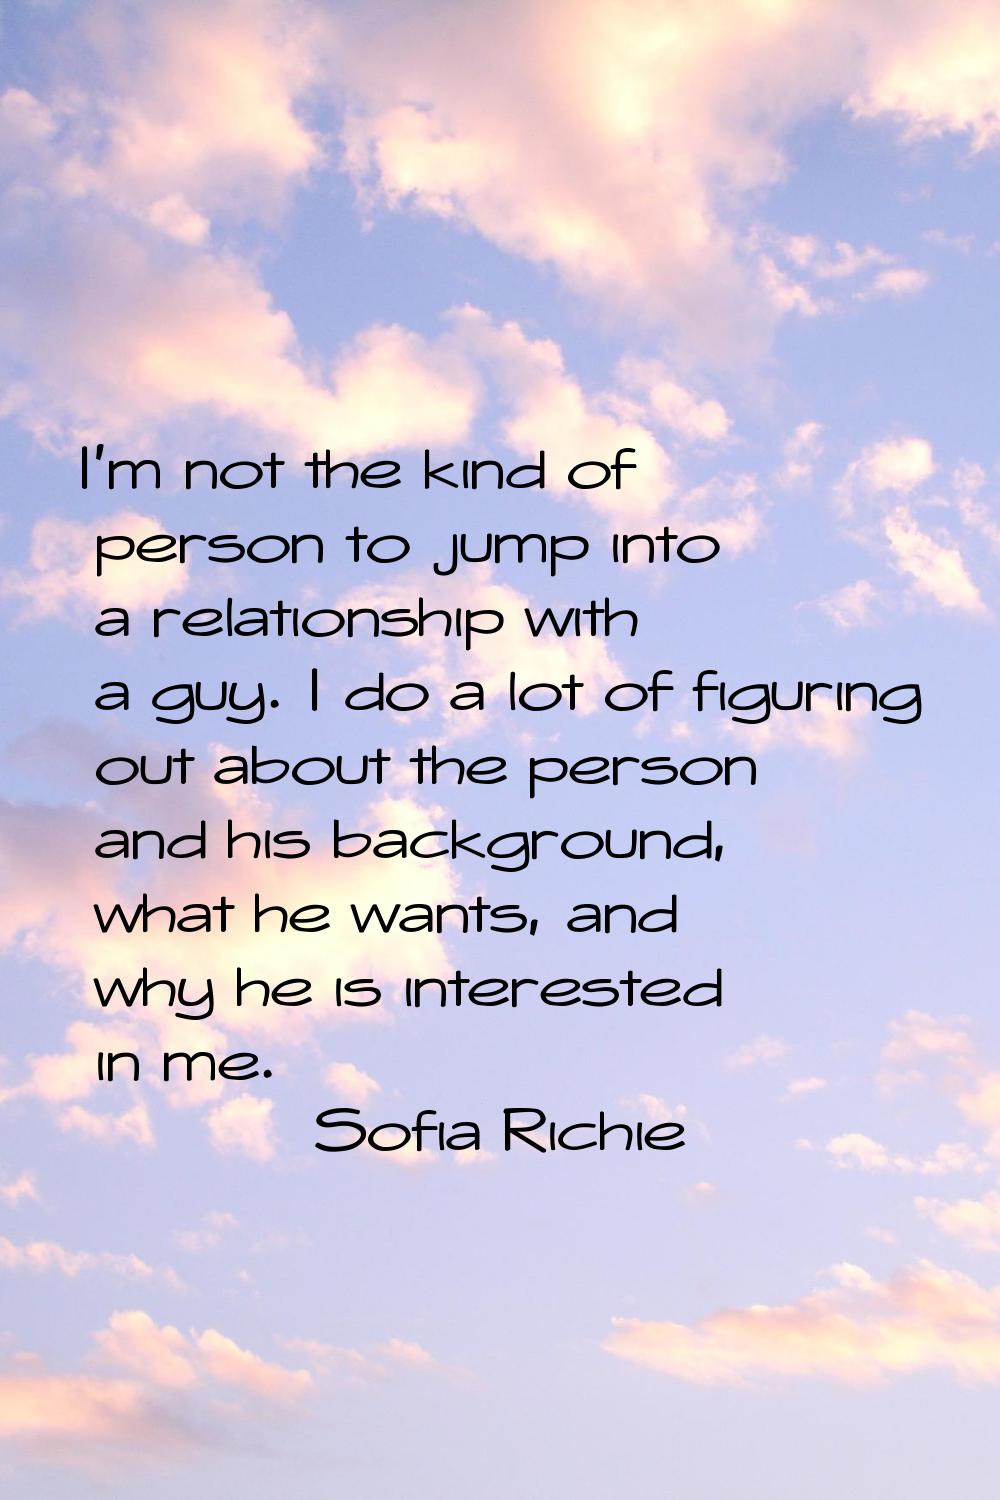 I'm not the kind of person to jump into a relationship with a guy. I do a lot of figuring out about